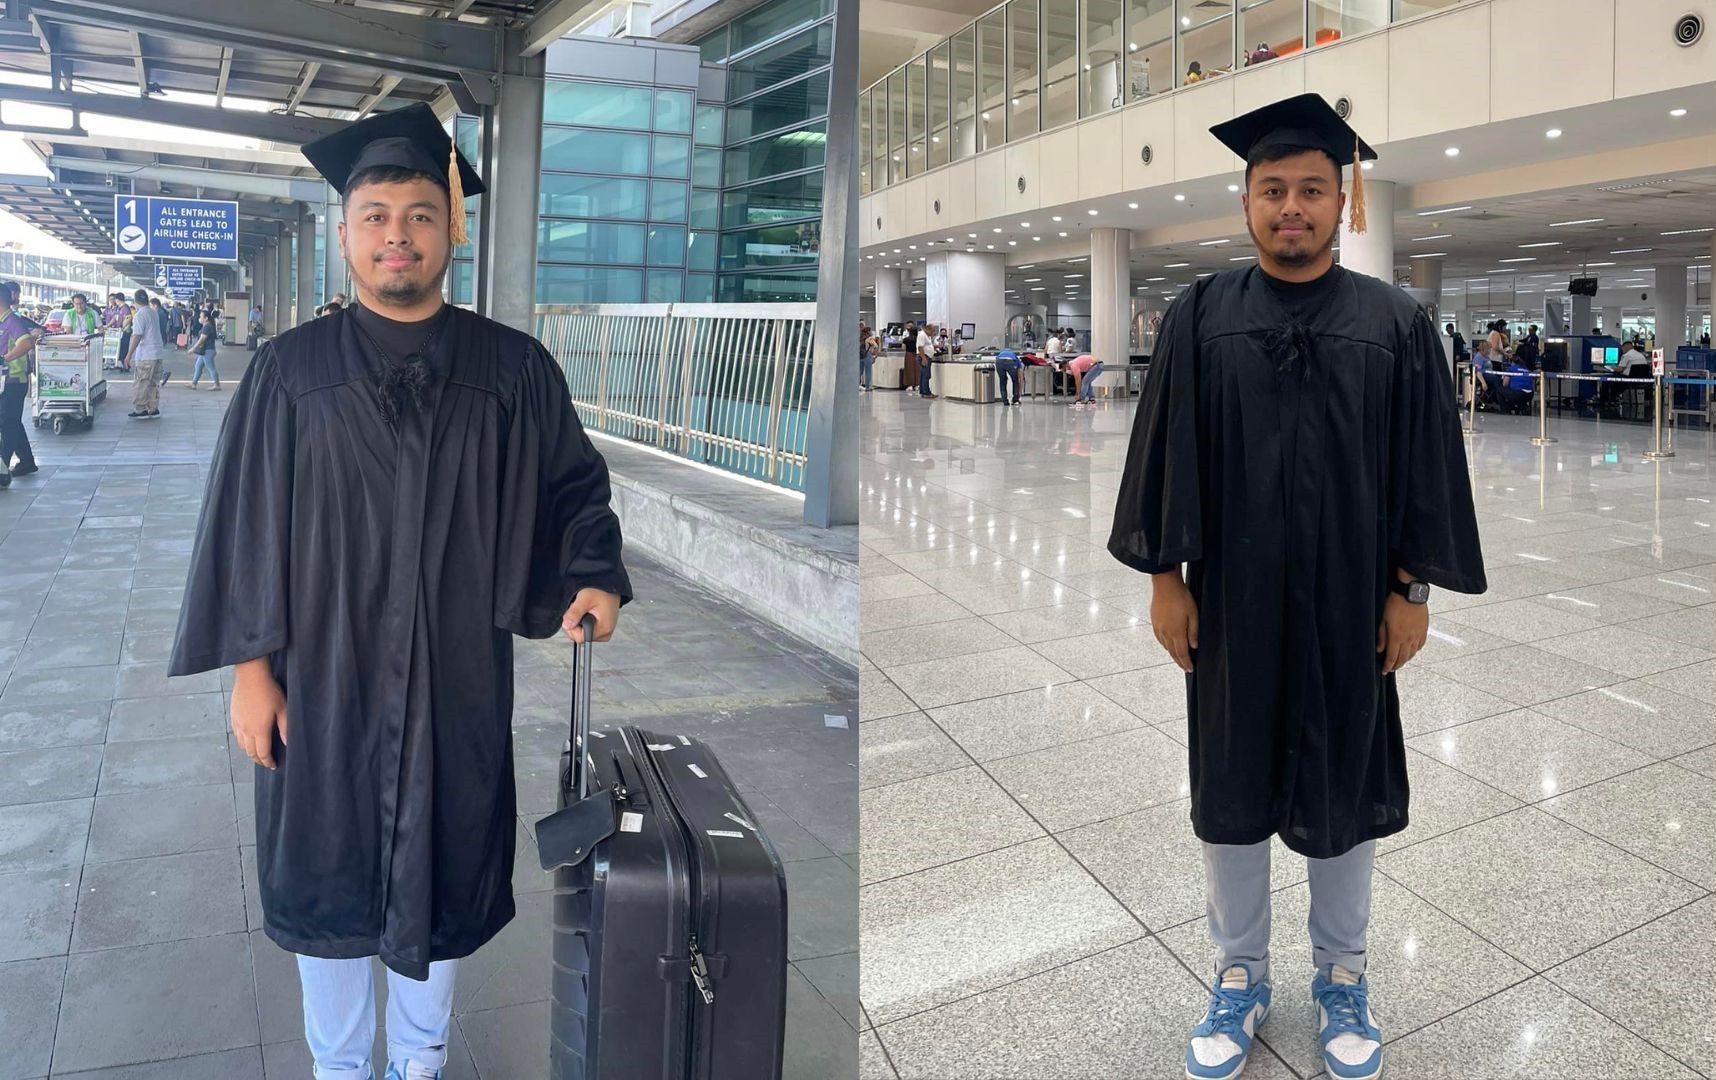 'Ewan ko na lang talaga': Vlogger wears toga to airport after Filipina missed flight due to immigration interview